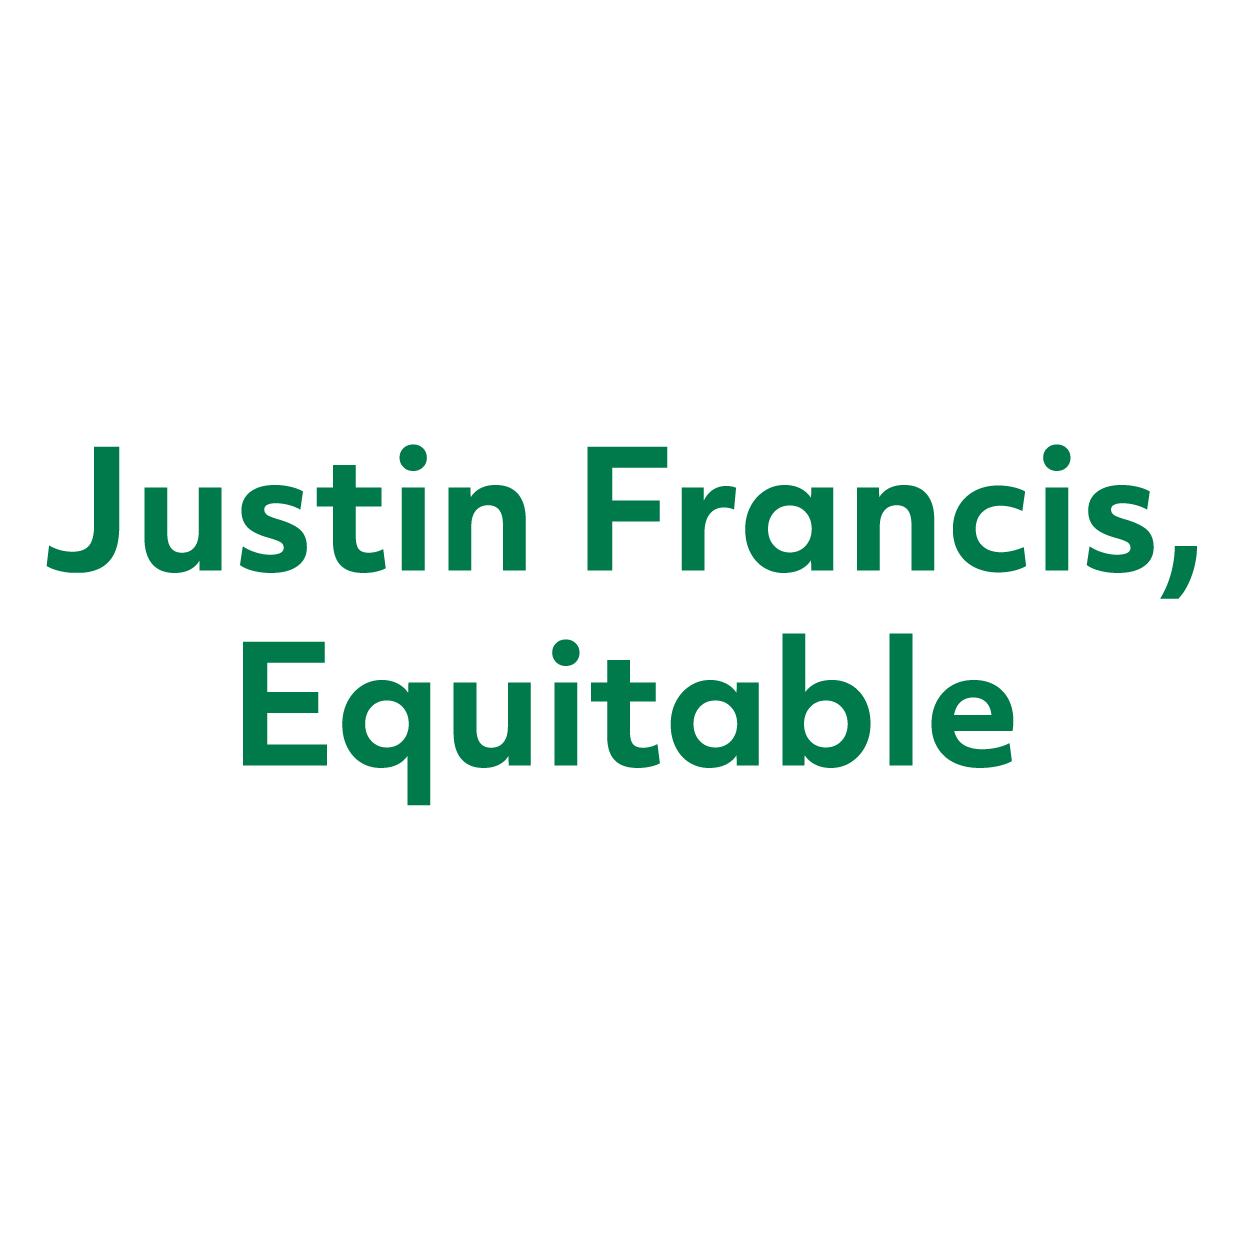 Justin Francis, Equitable